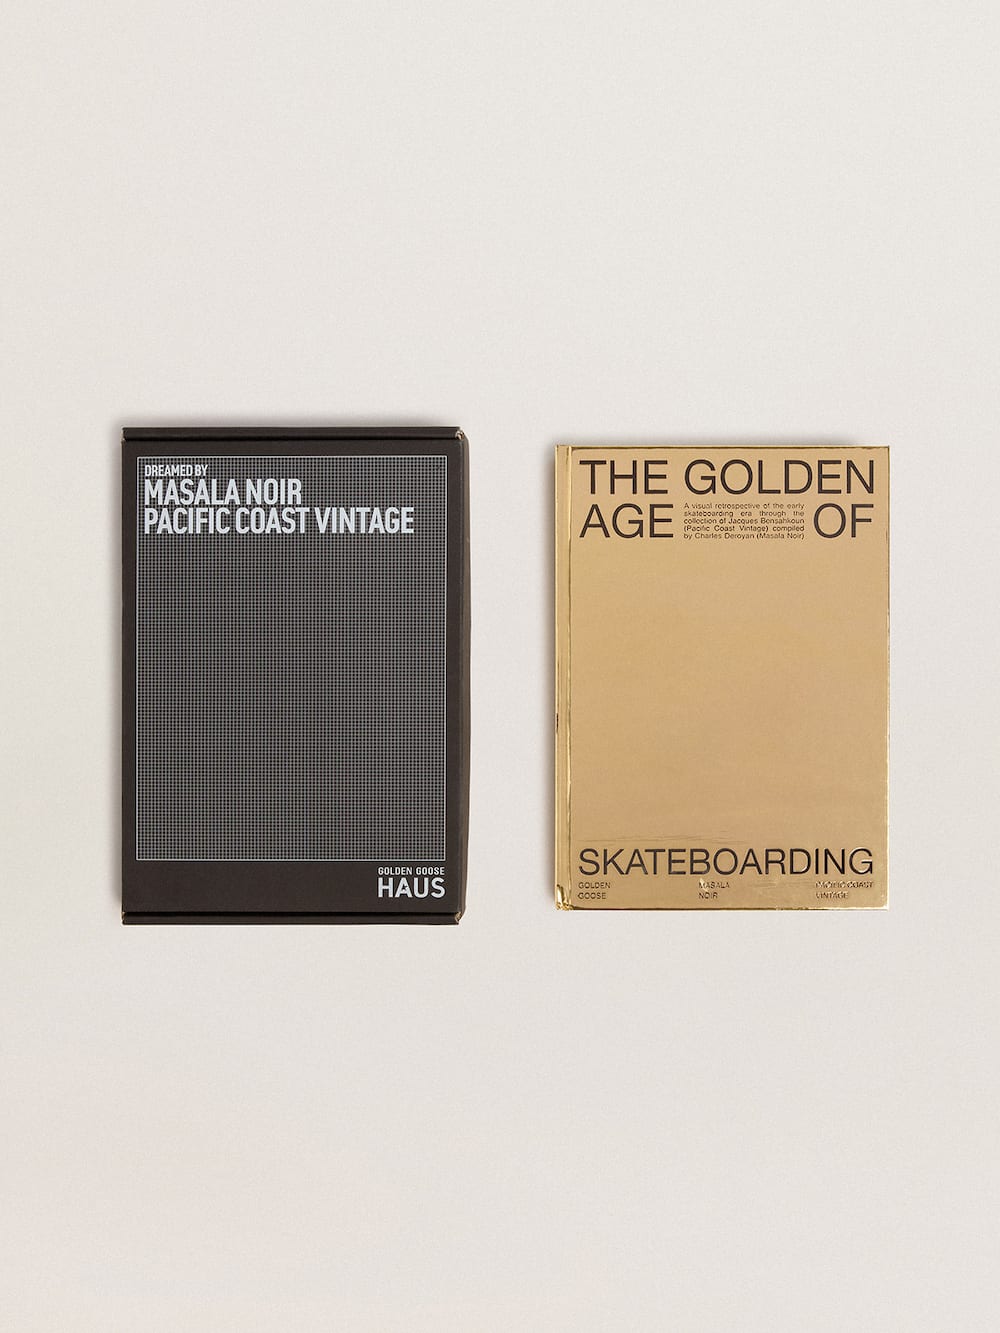 Golden Goose - "The Golden age of Skateboarding" Dreamed by Pacific Coast Vintage and Masala Noir exclusividade HAUS of Dreamers in 